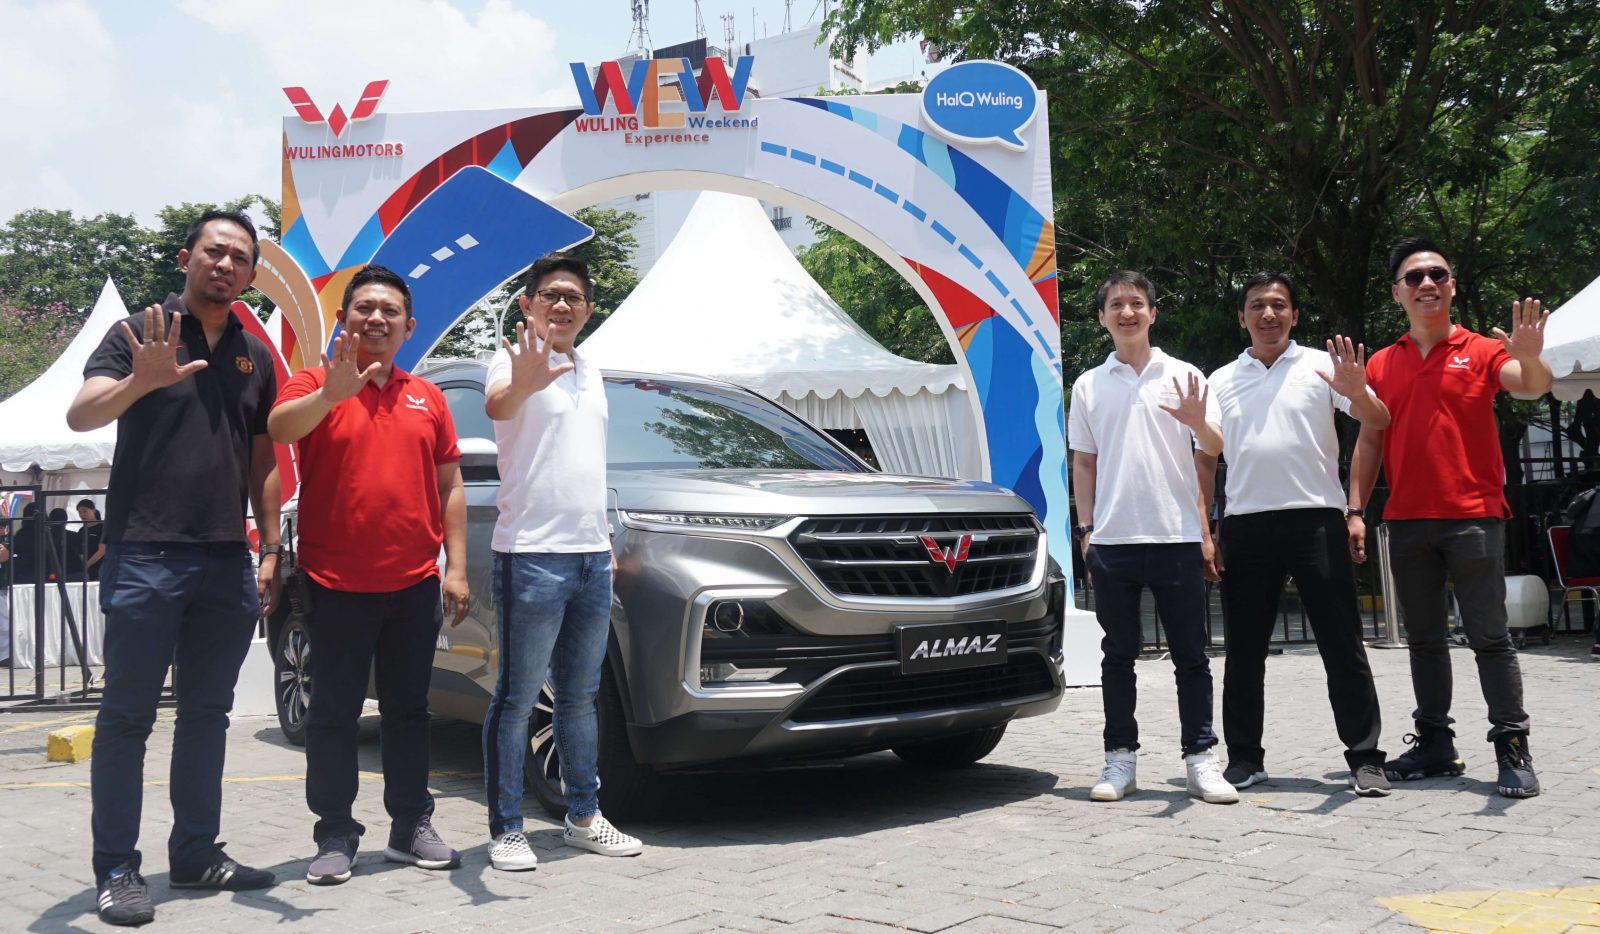 Image The Excitement of Wuling Experience Weekend Comes to Bogor